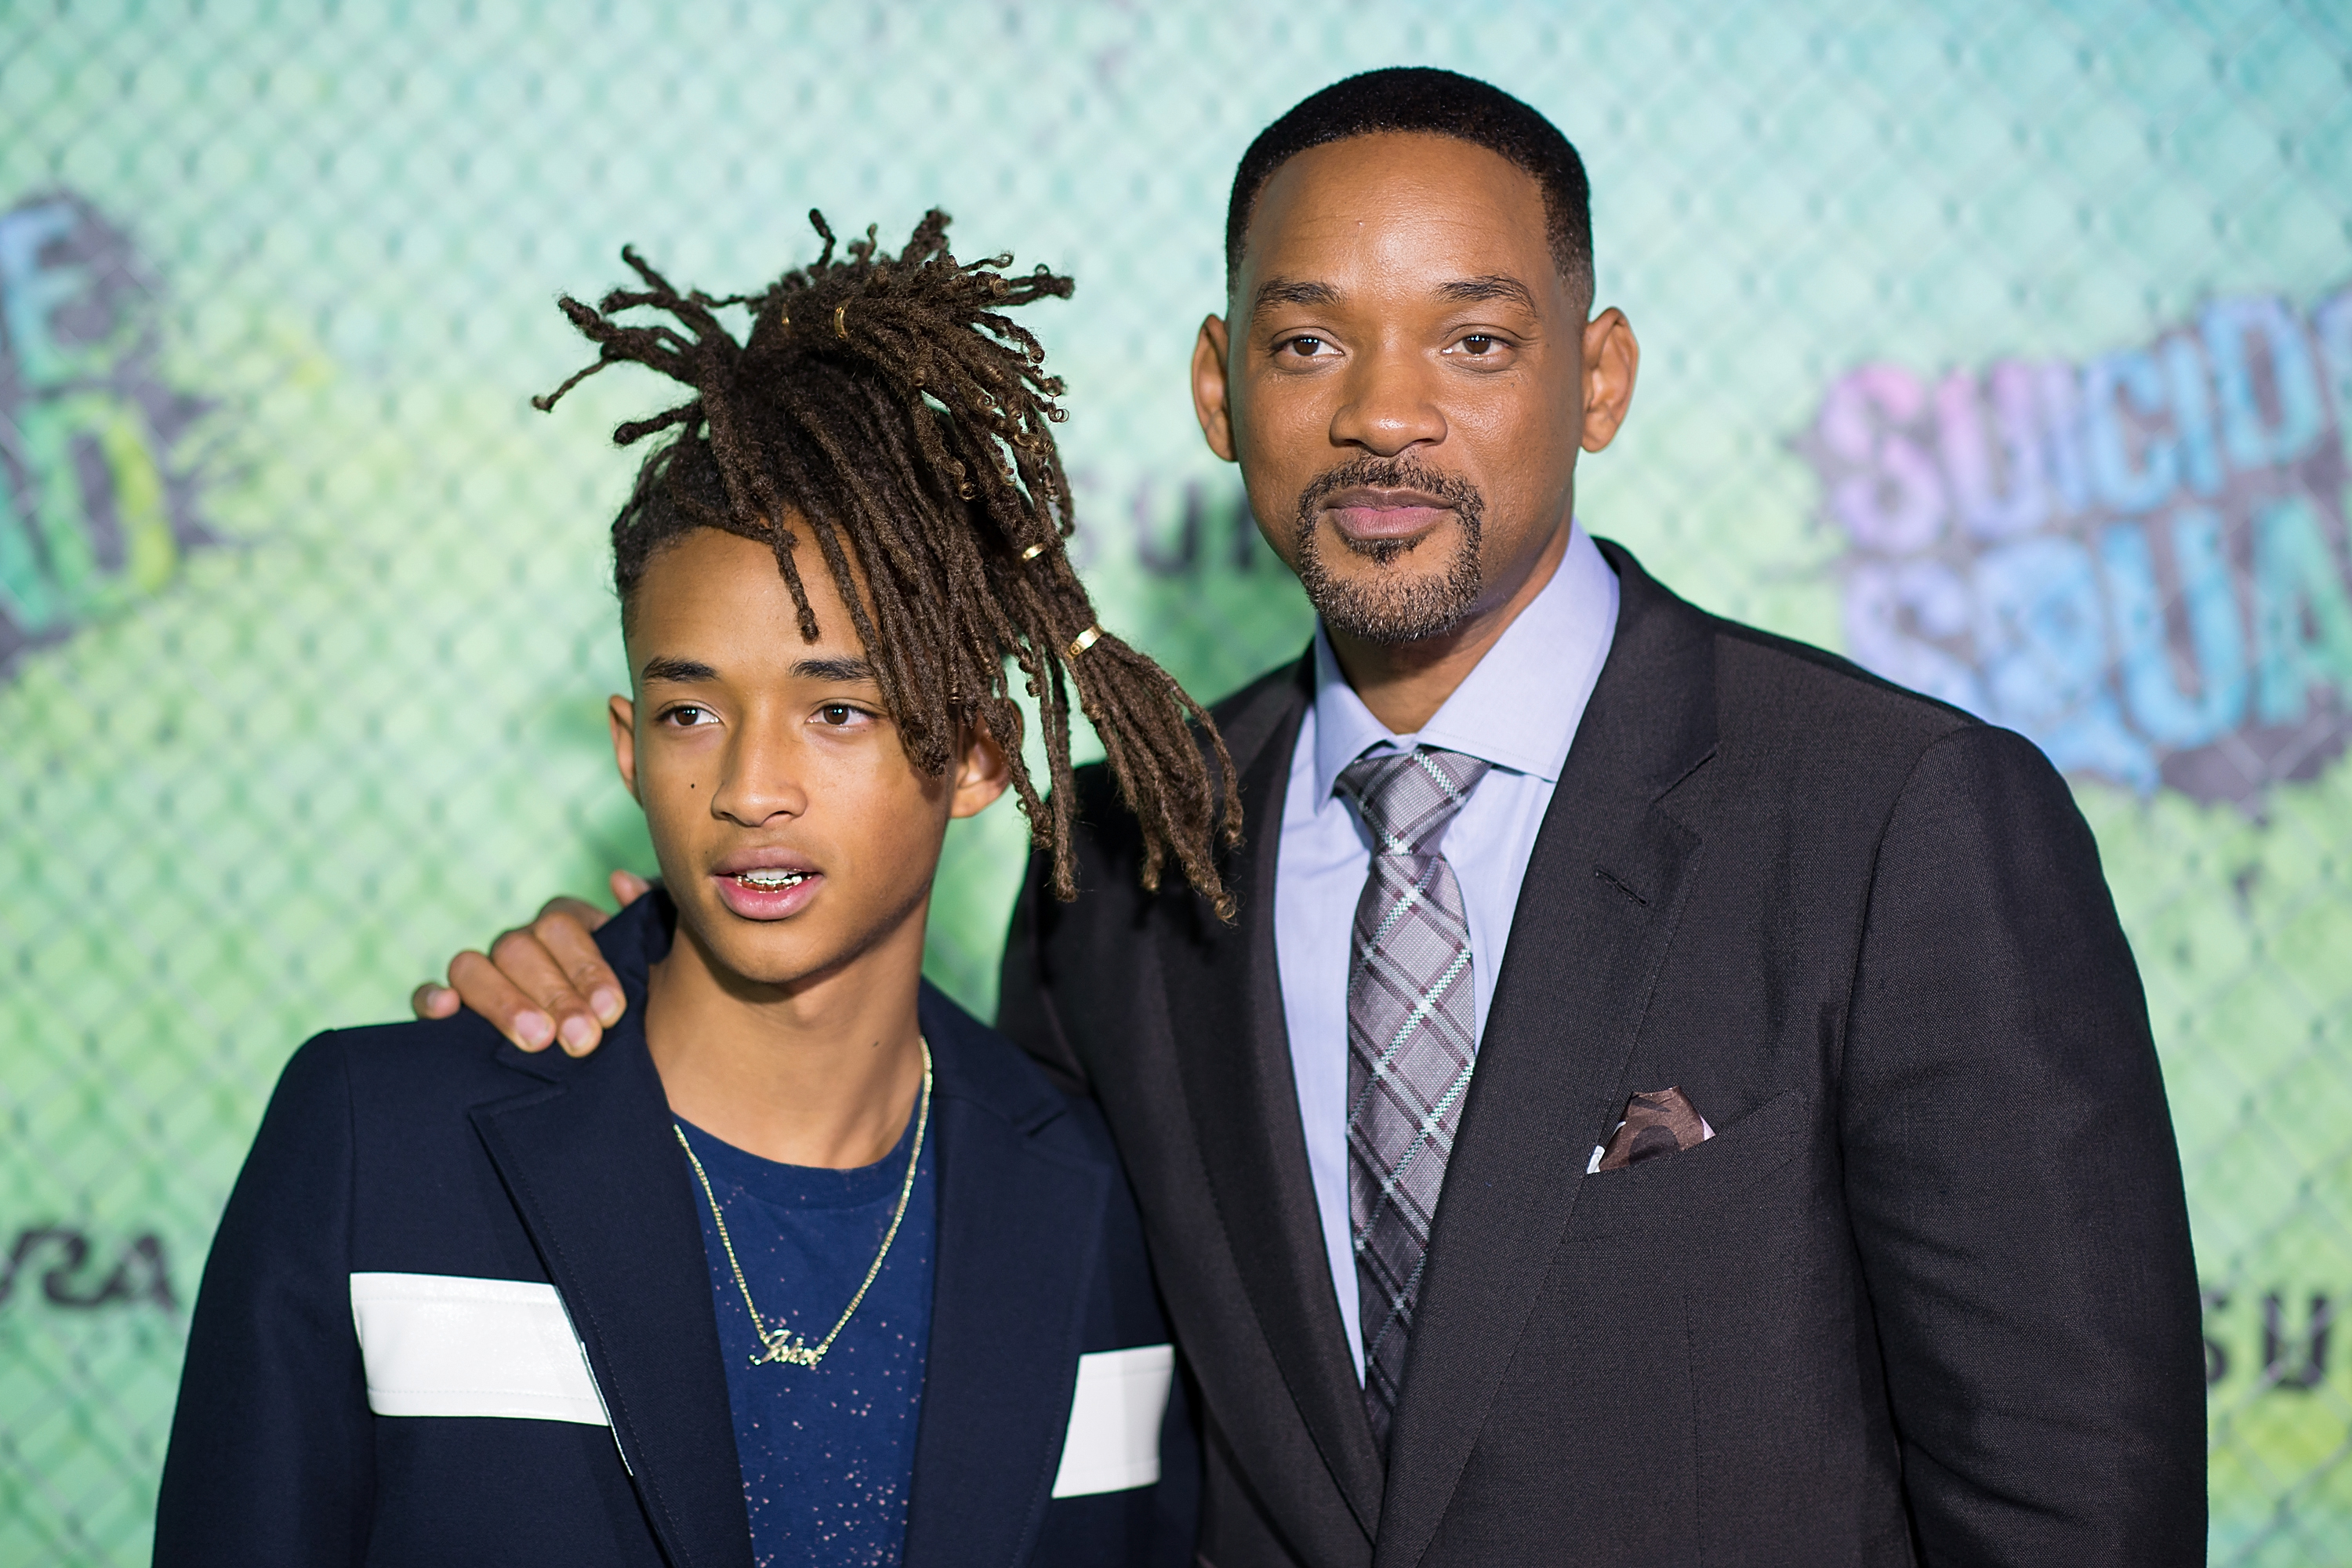 Jaden Smith's new clothes range inspired by 'The Fresh Prince of Bel Air